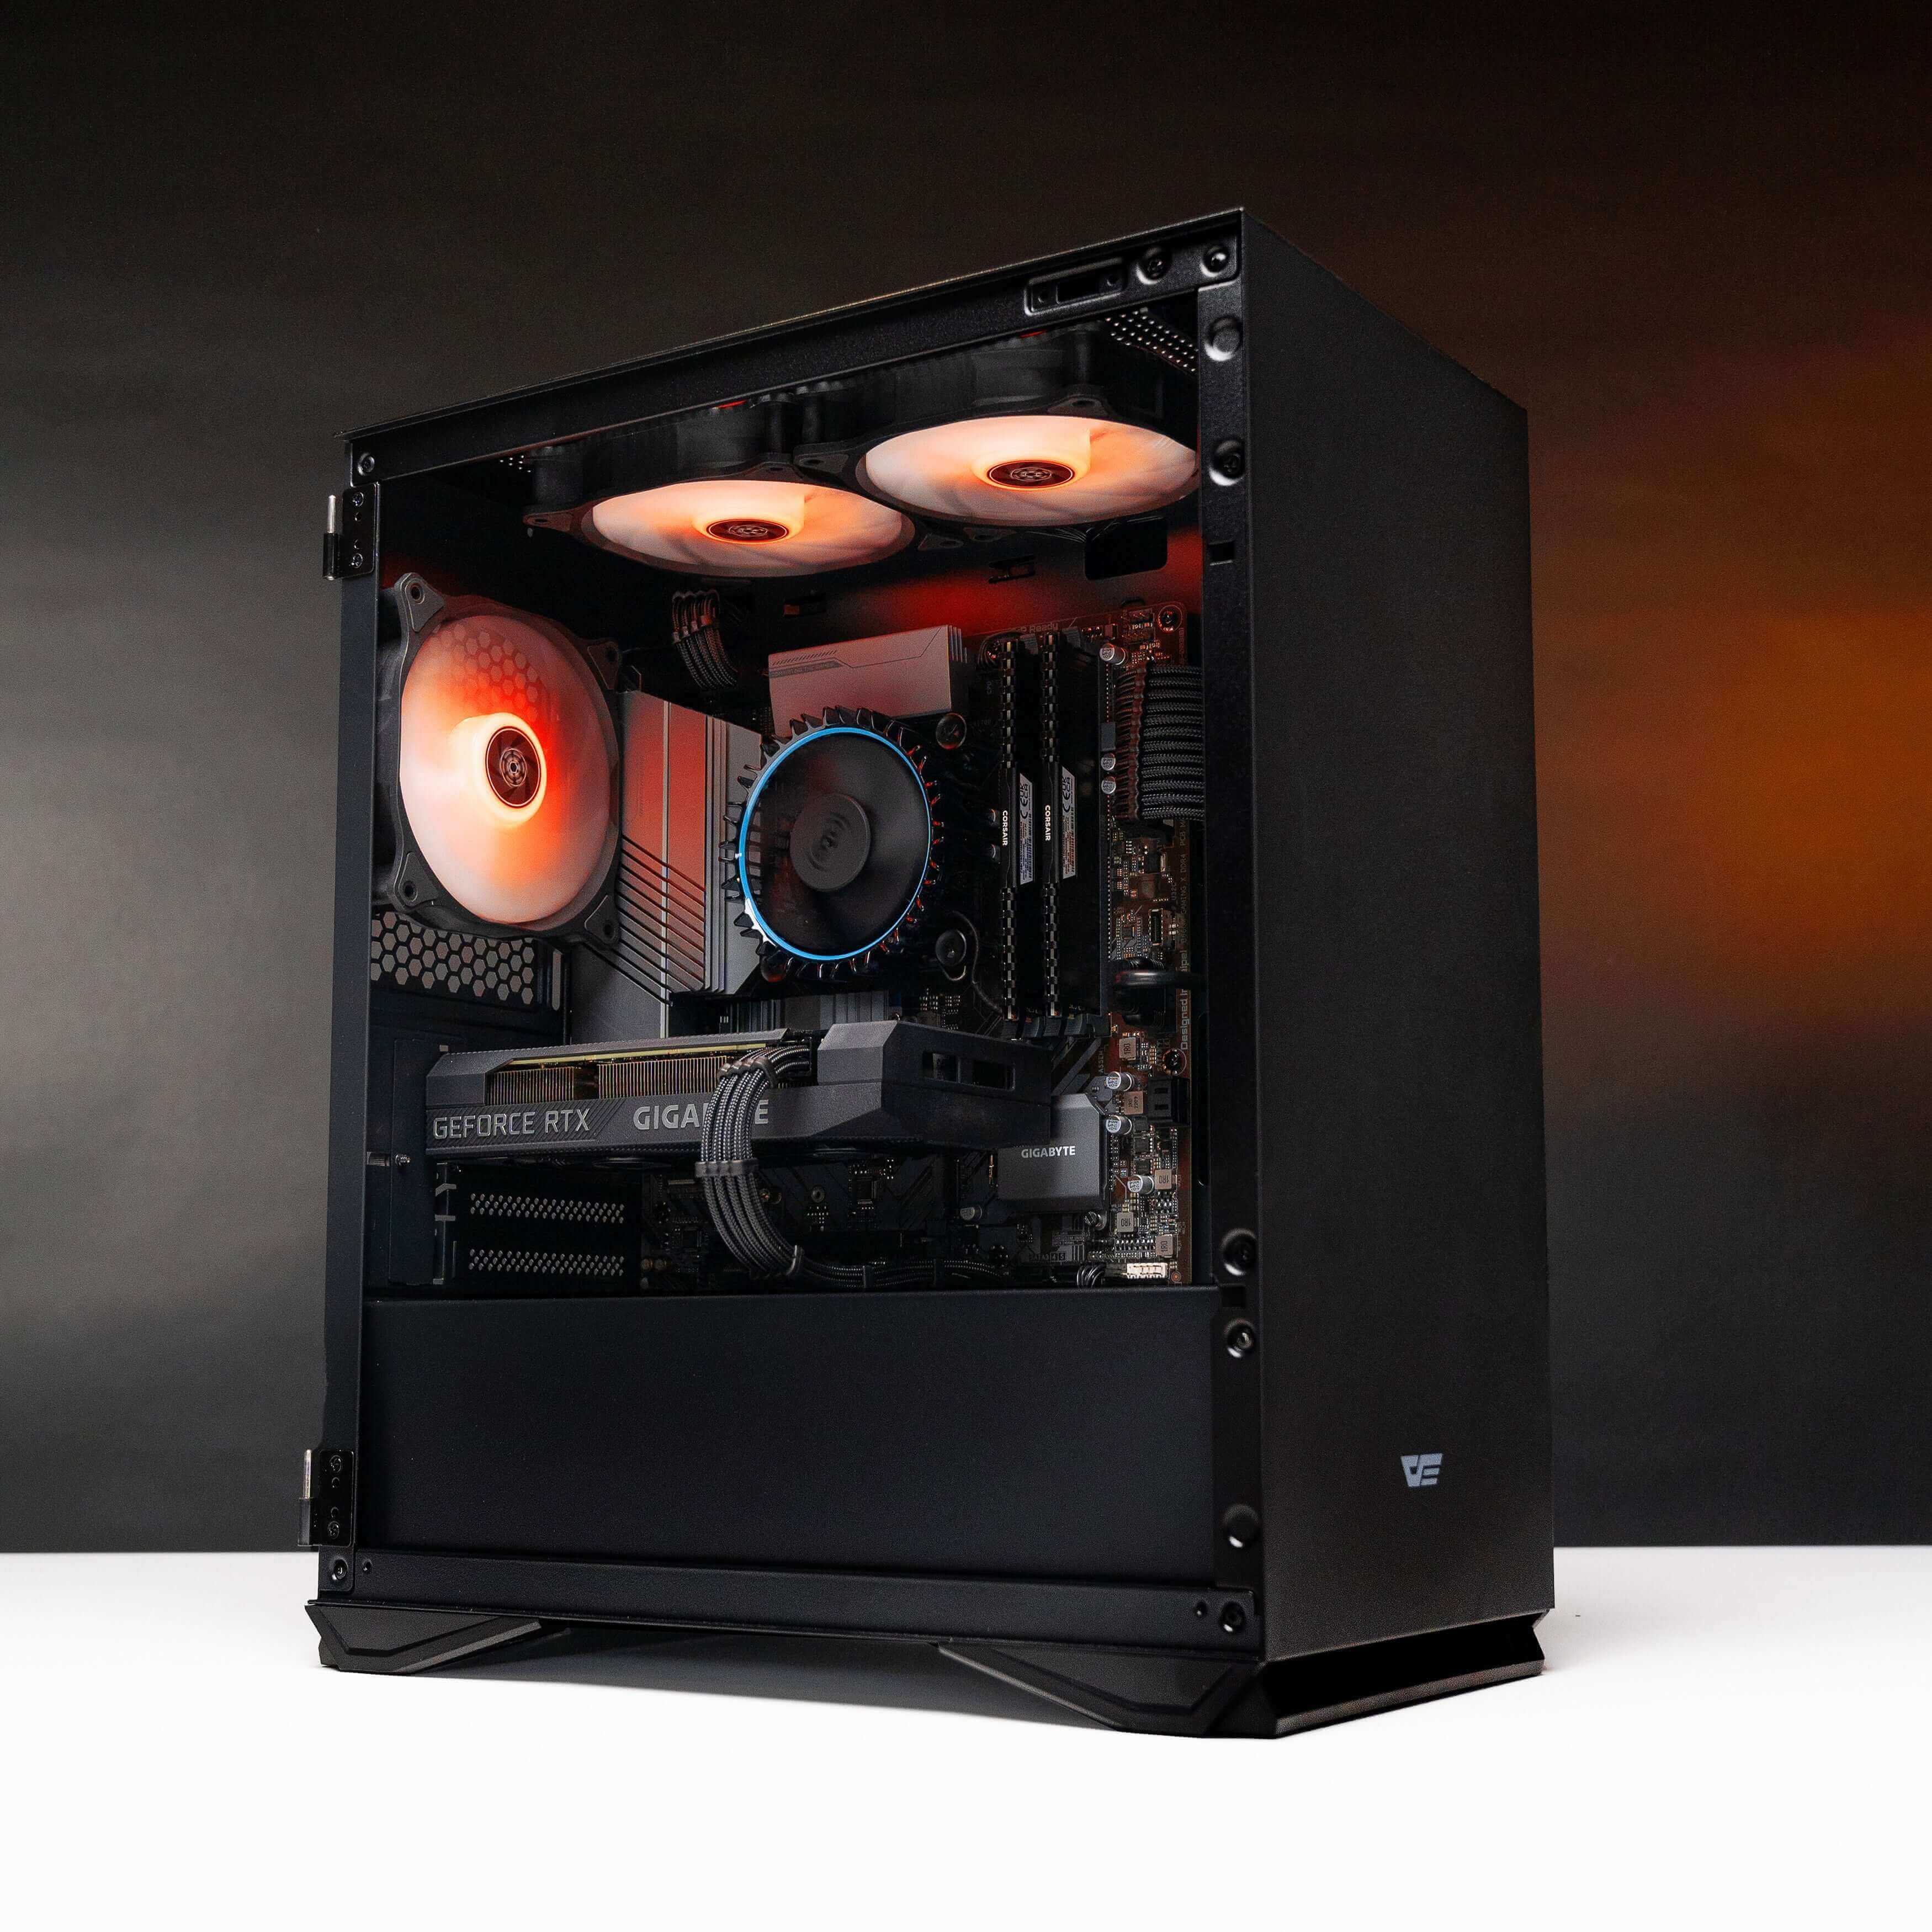 Side view of the powerful ARROW: LVL 5 Gaming PC showcasing its impressive components